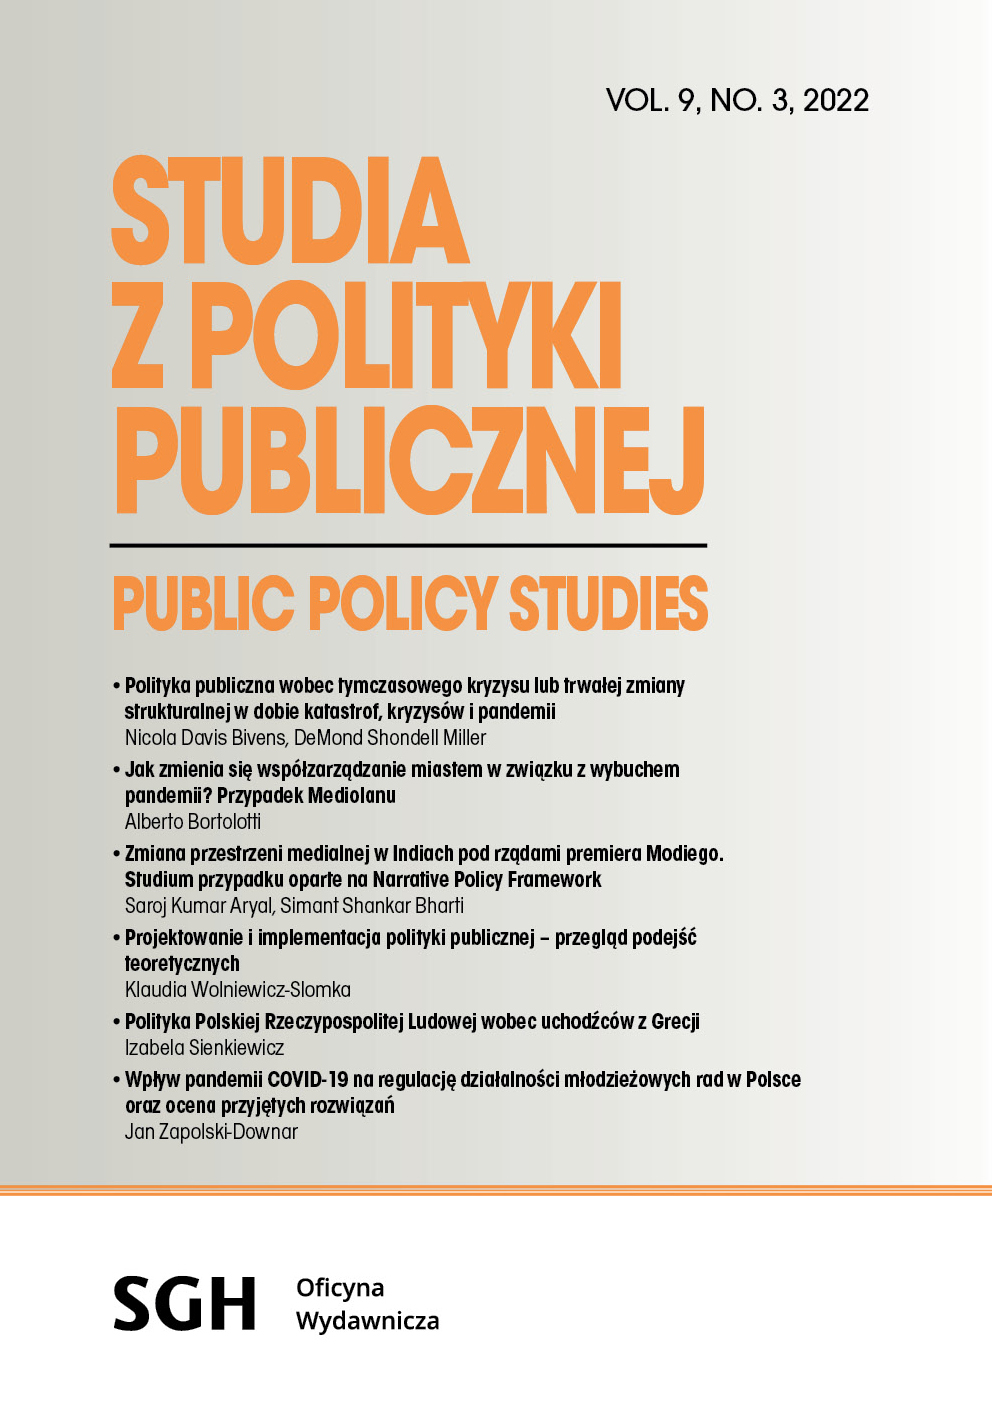 Changing the media landscape in India under the Modi government: a case study based on the Narrative Policy Framework Cover Image